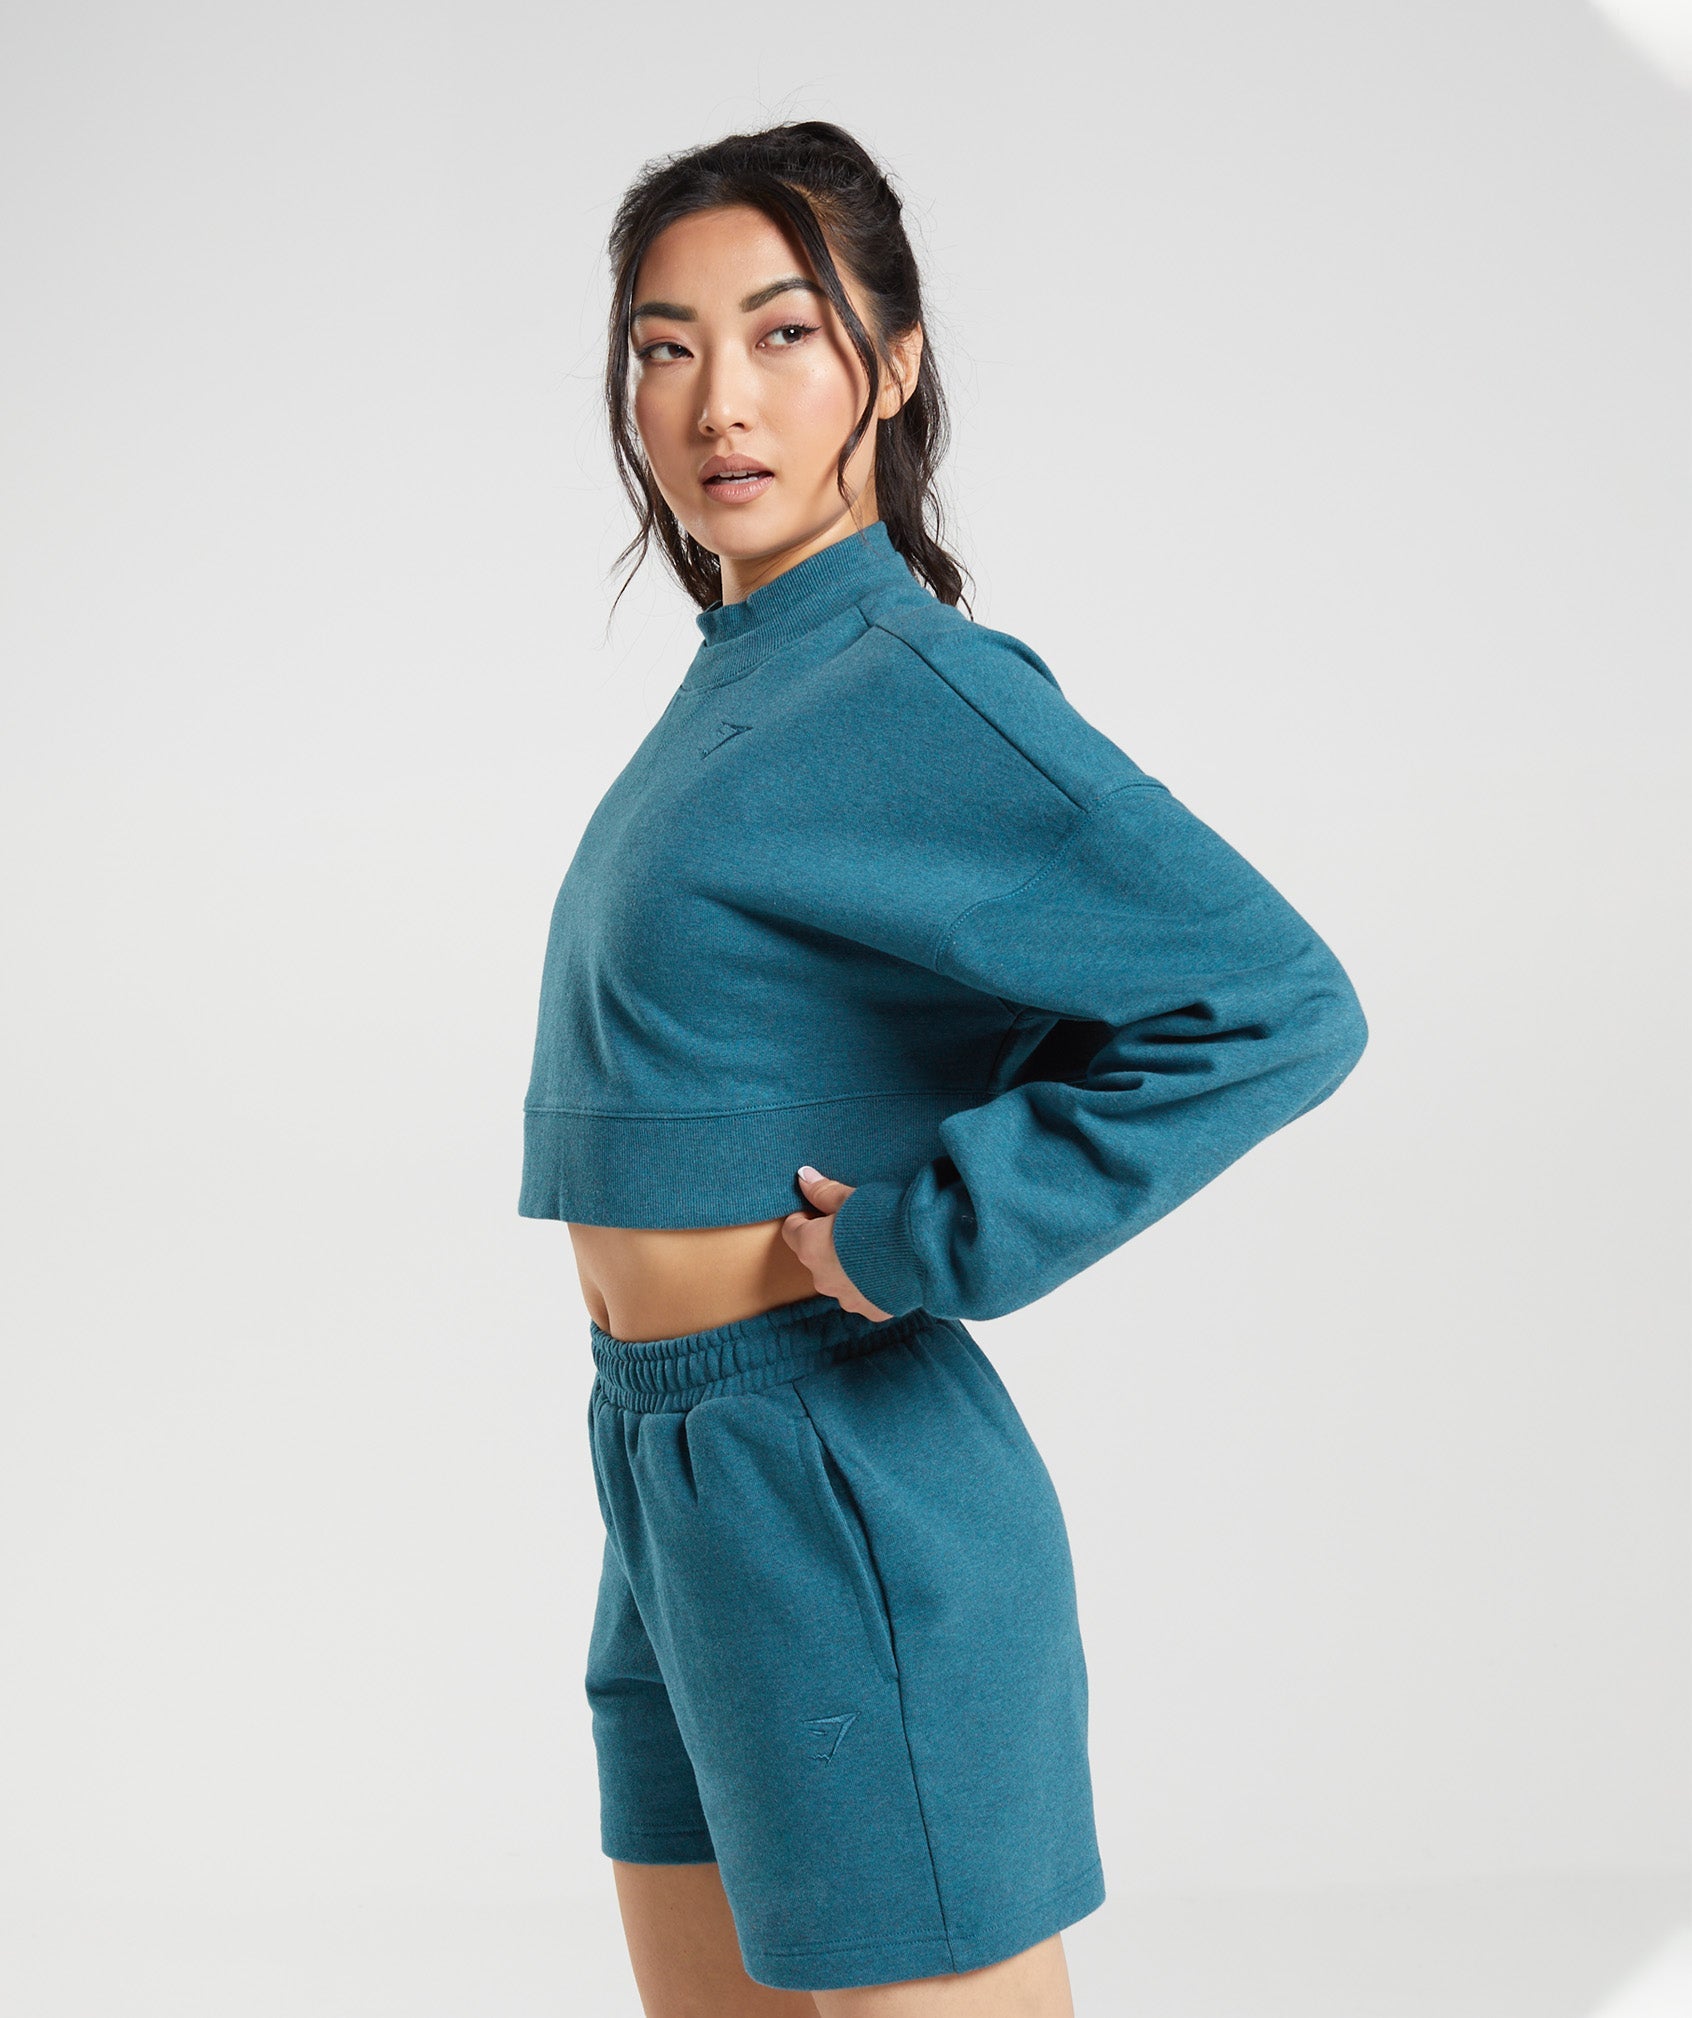 Rest Day Sweats Cropped Pullover in Steel Blue Marl